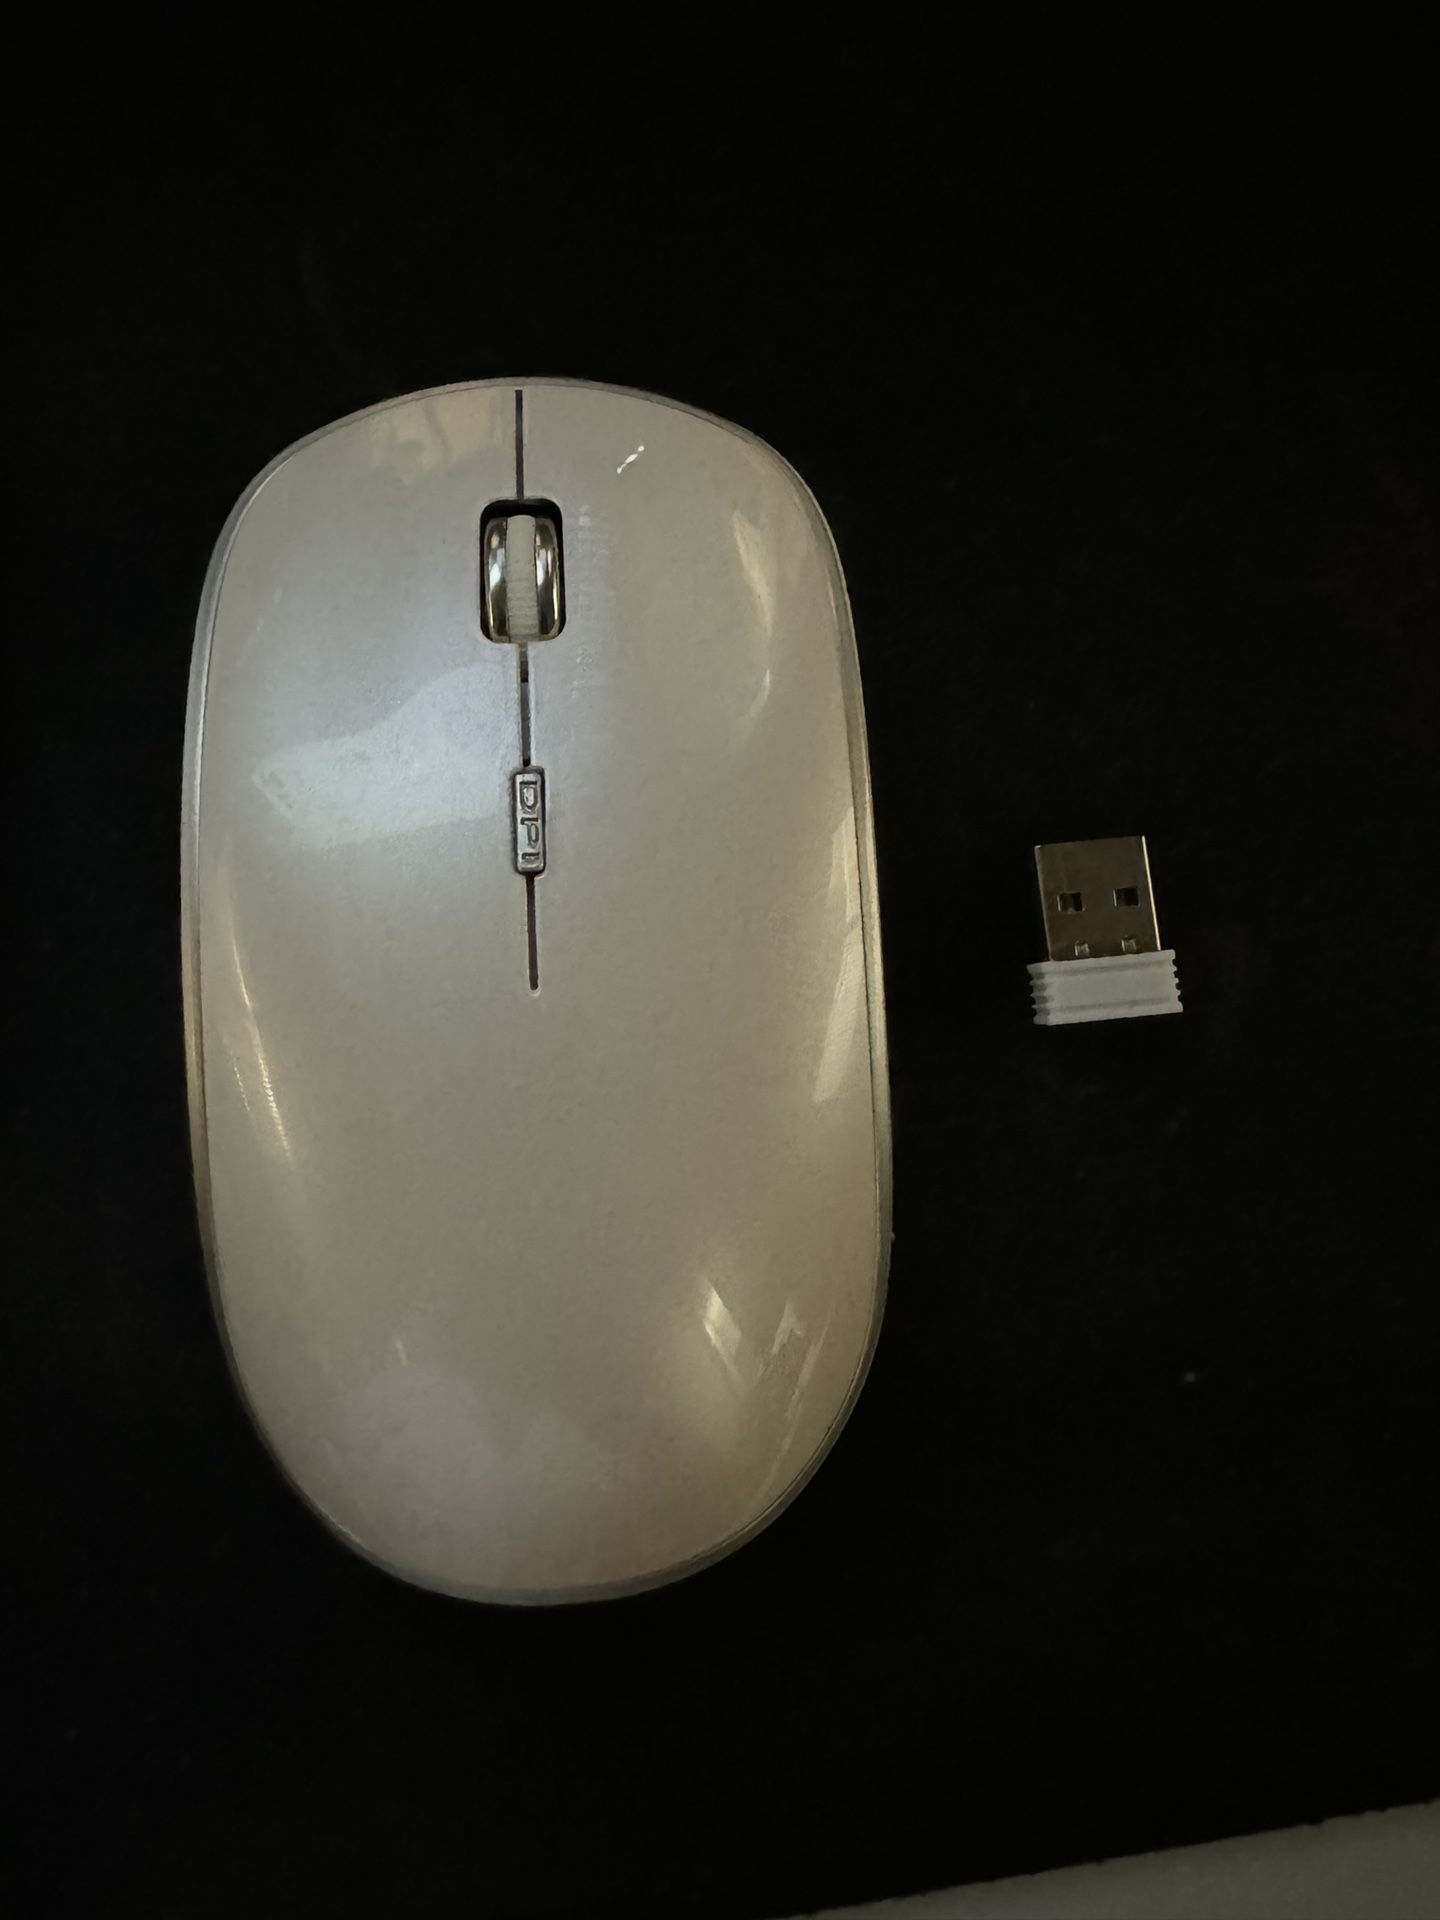 Wireless USB Mouse